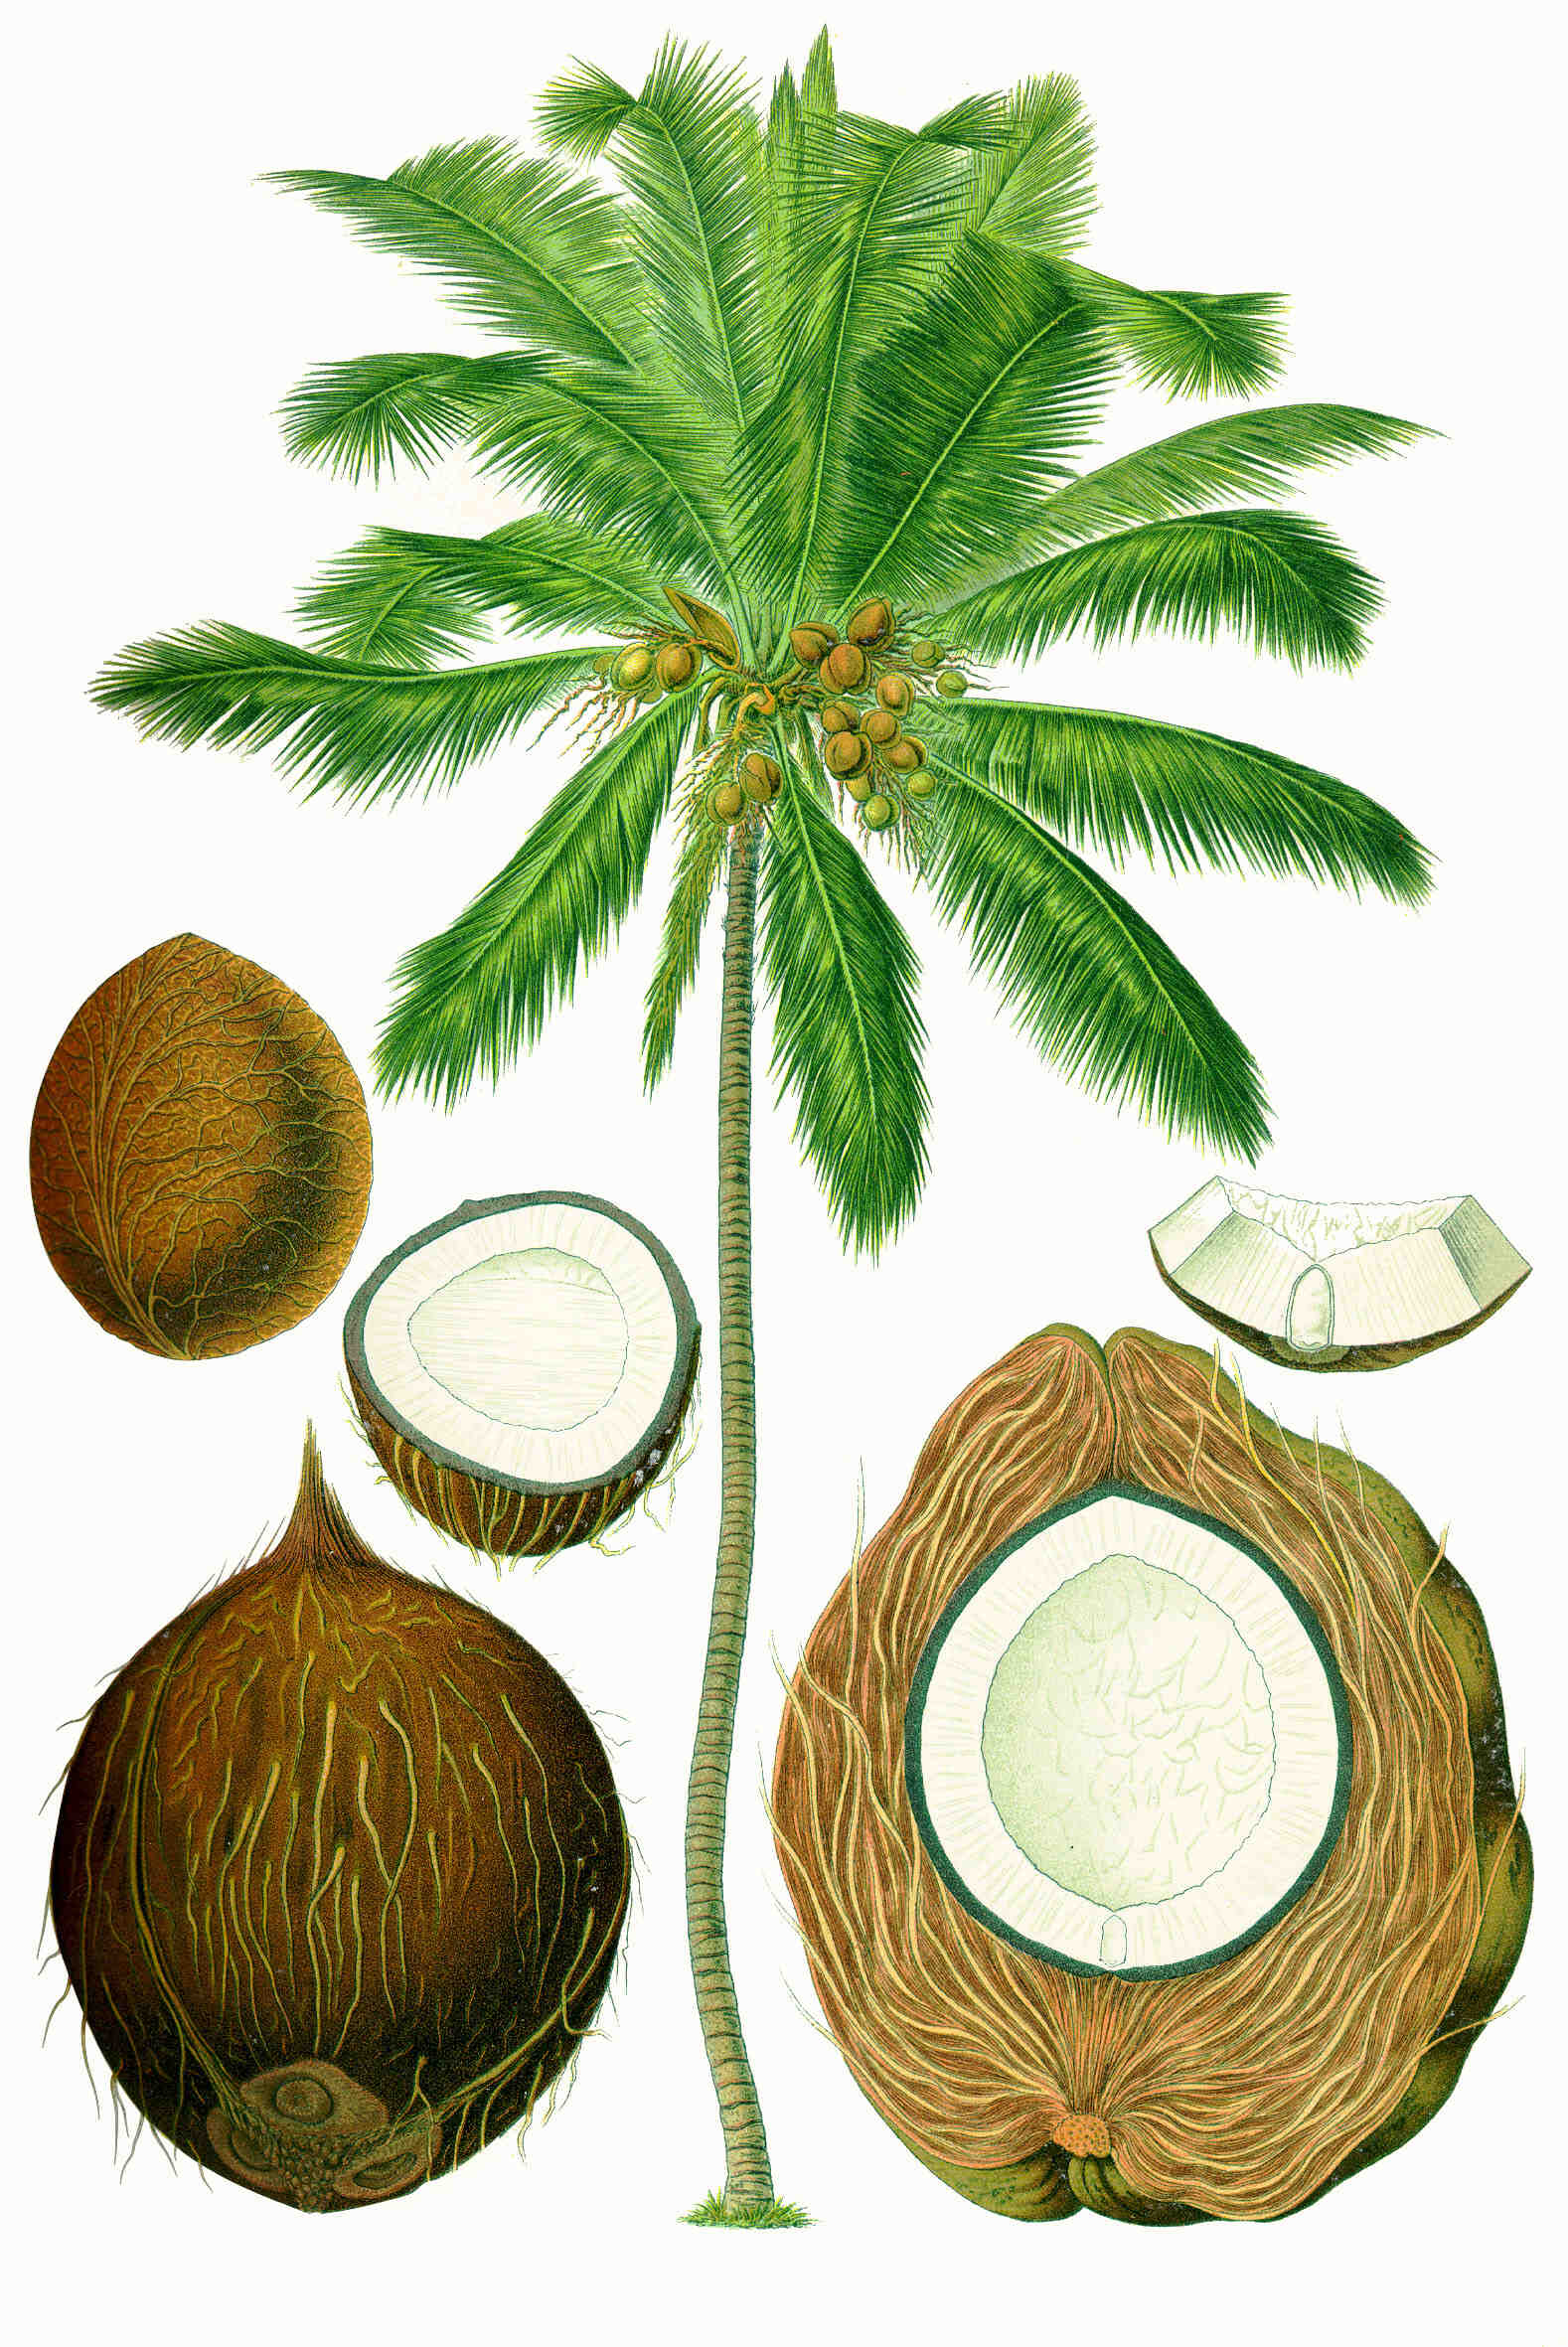 Why is coconut called coconut?